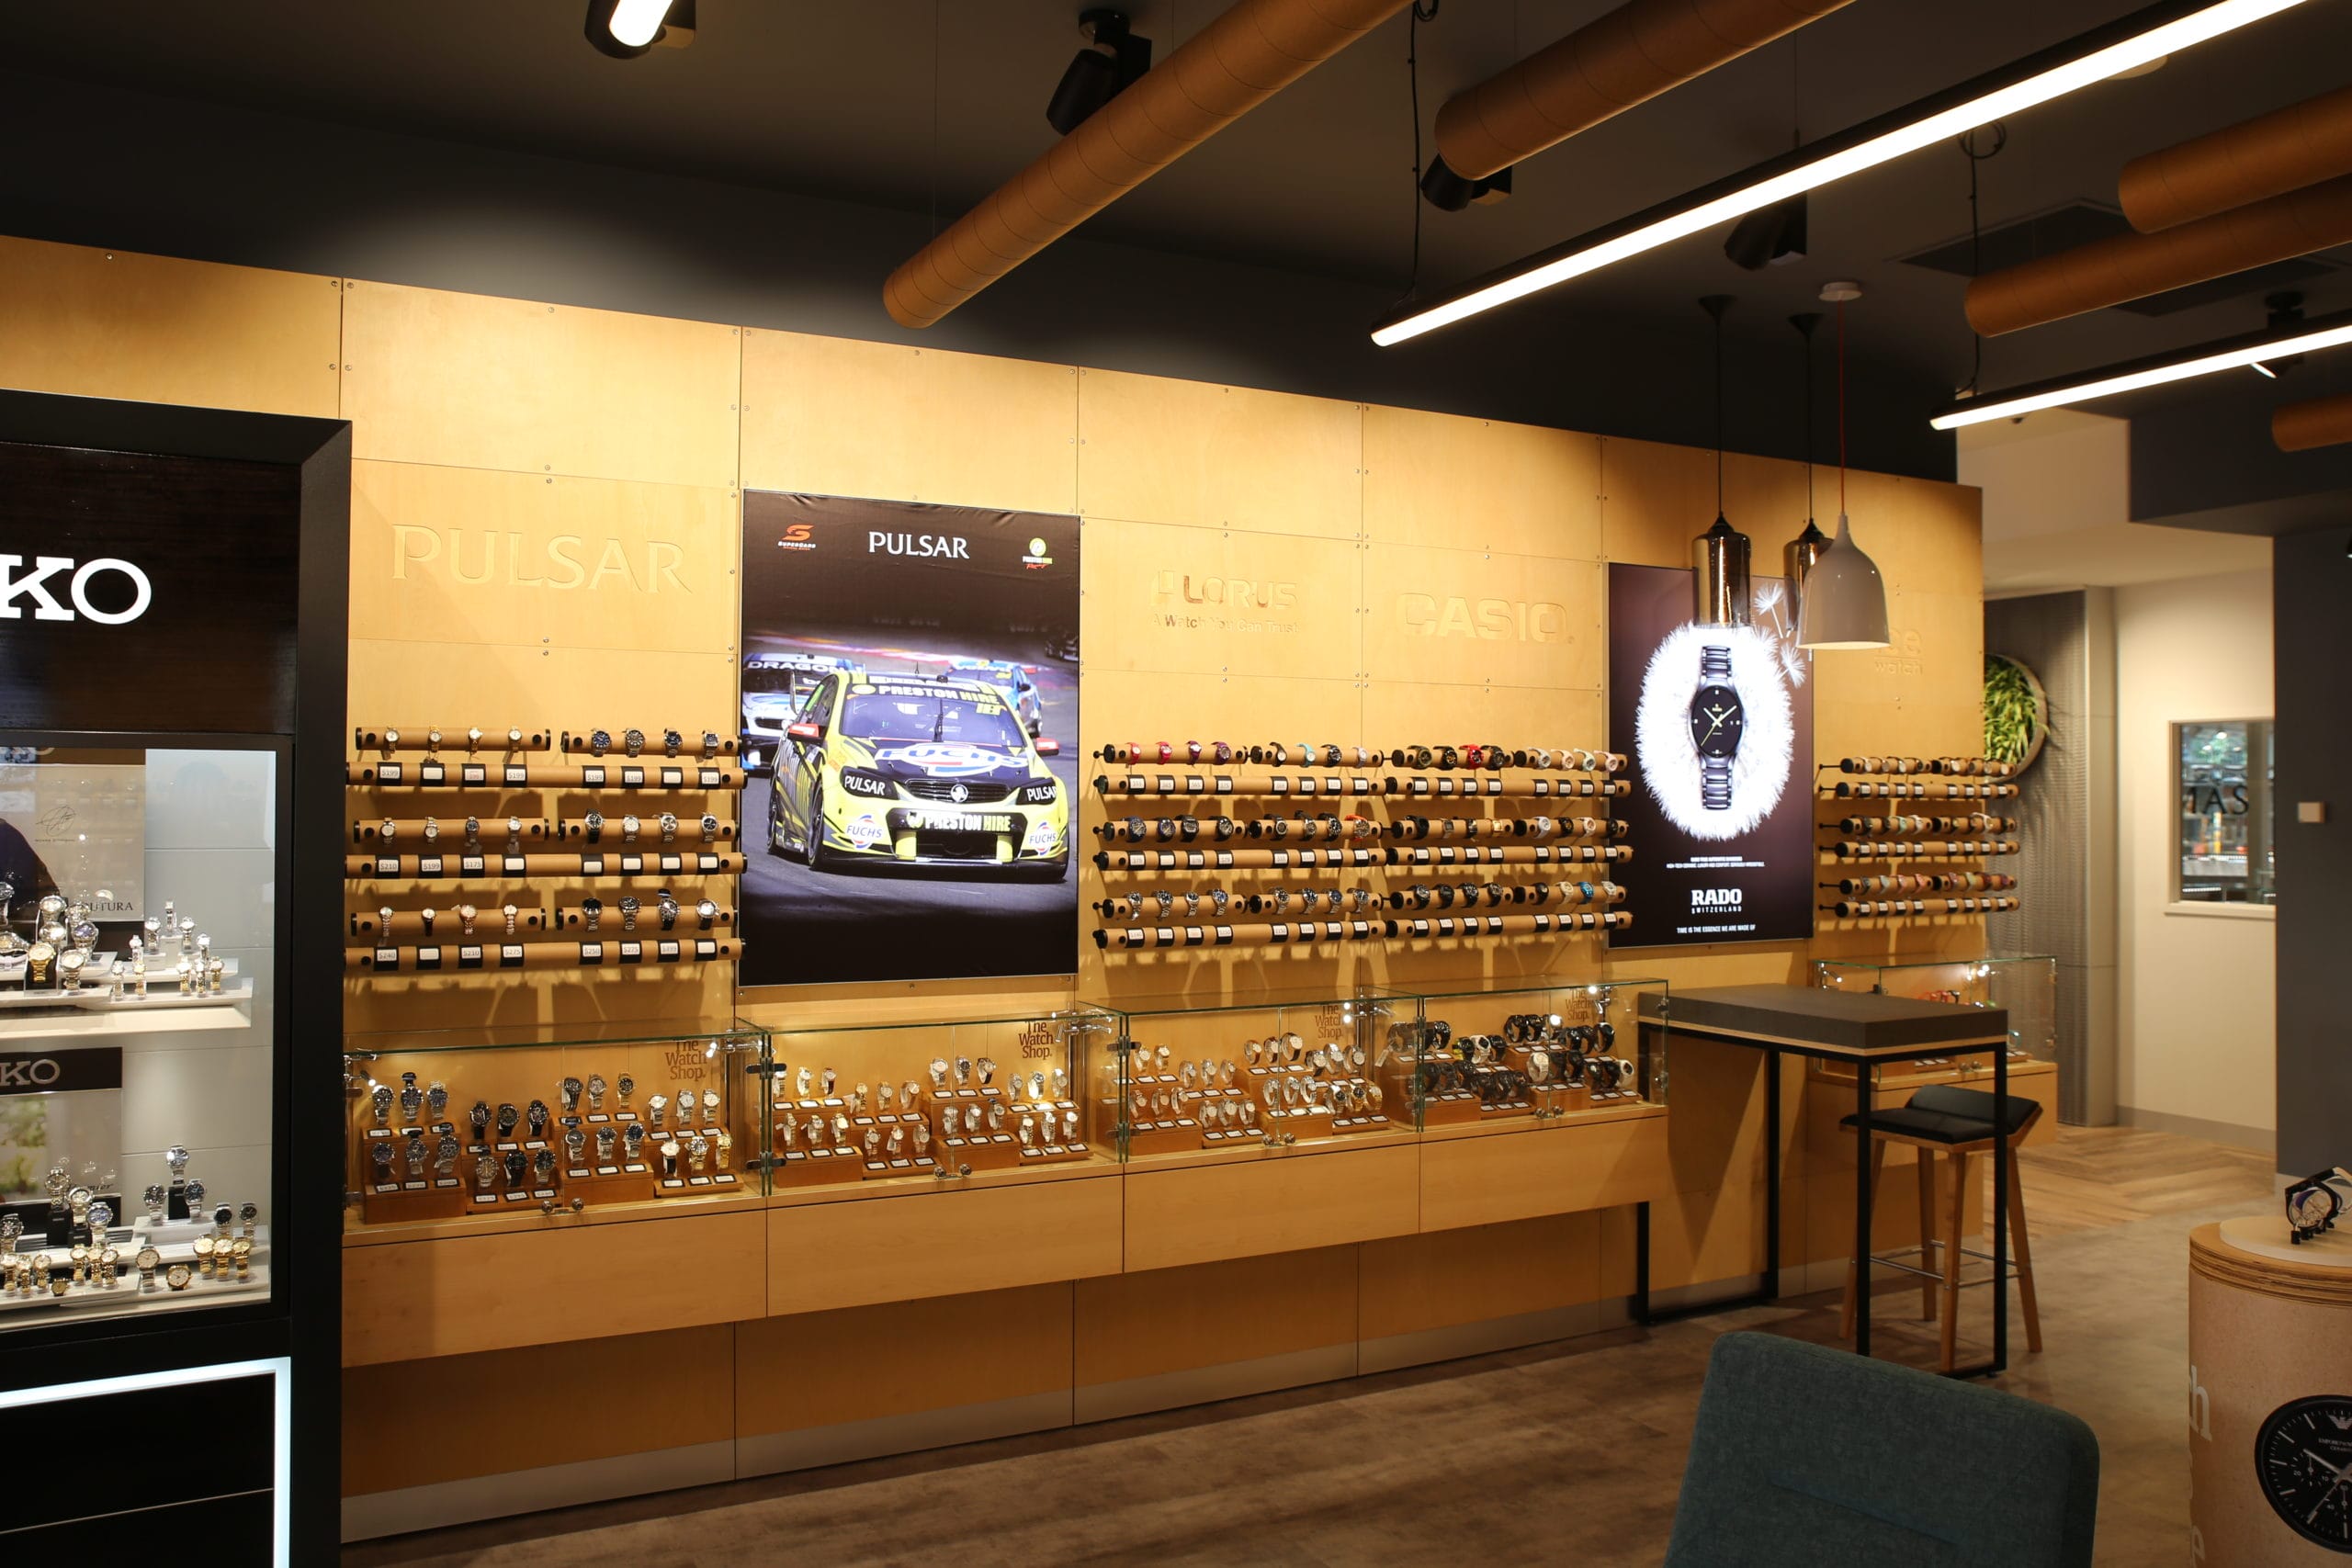 The Watch Shop